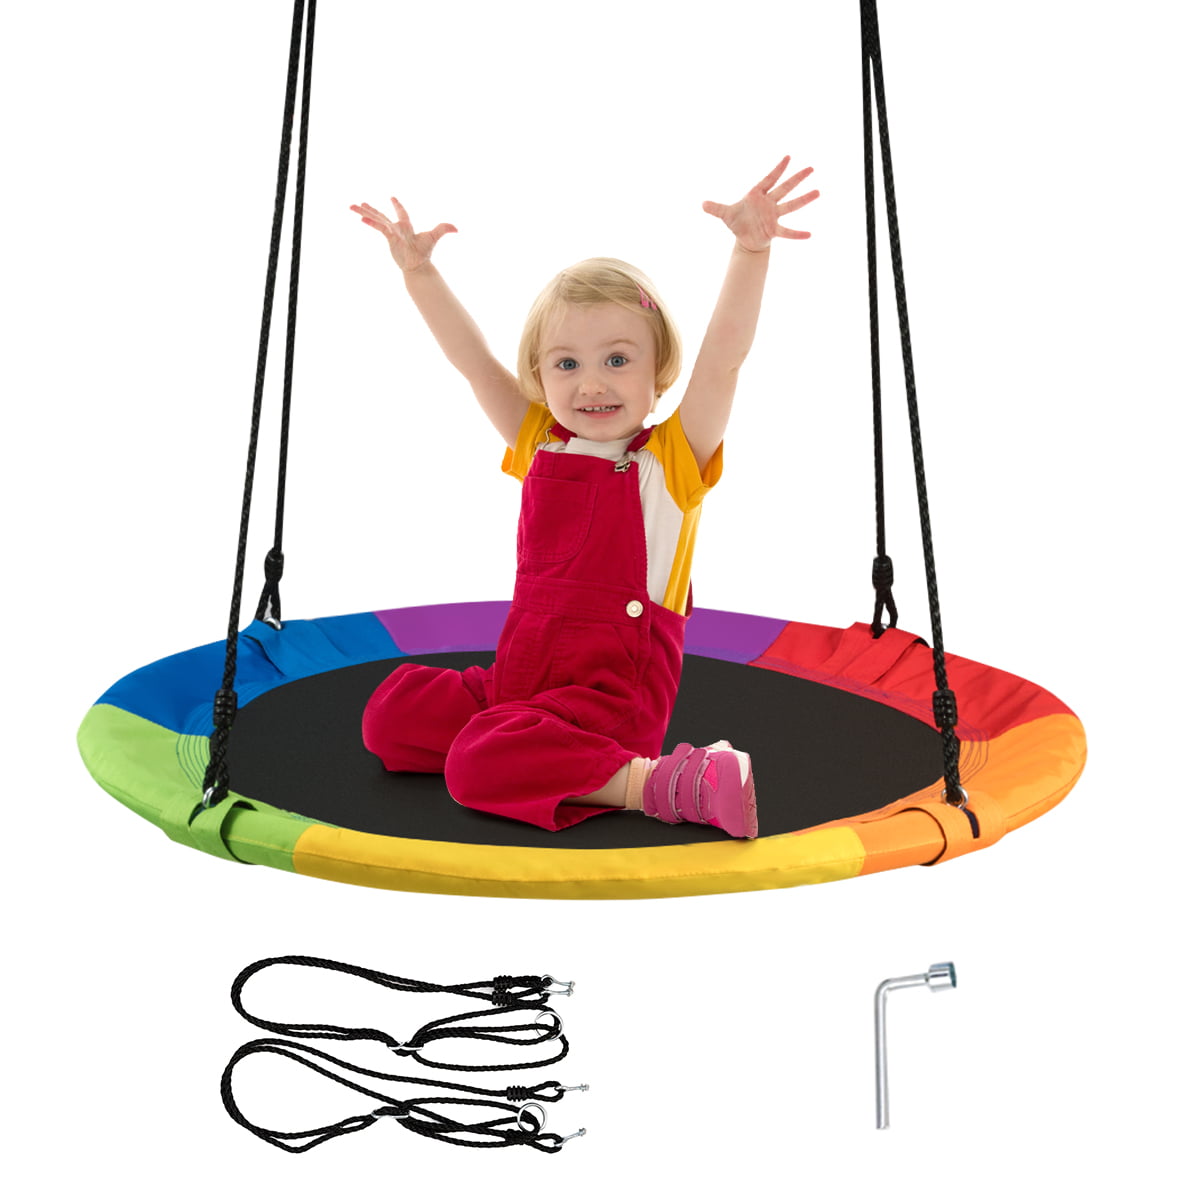 Goplus 40" Flying Saucer Tree Swing Indoor Outdoor Play Set Swing for Kids colorful - image 1 of 10